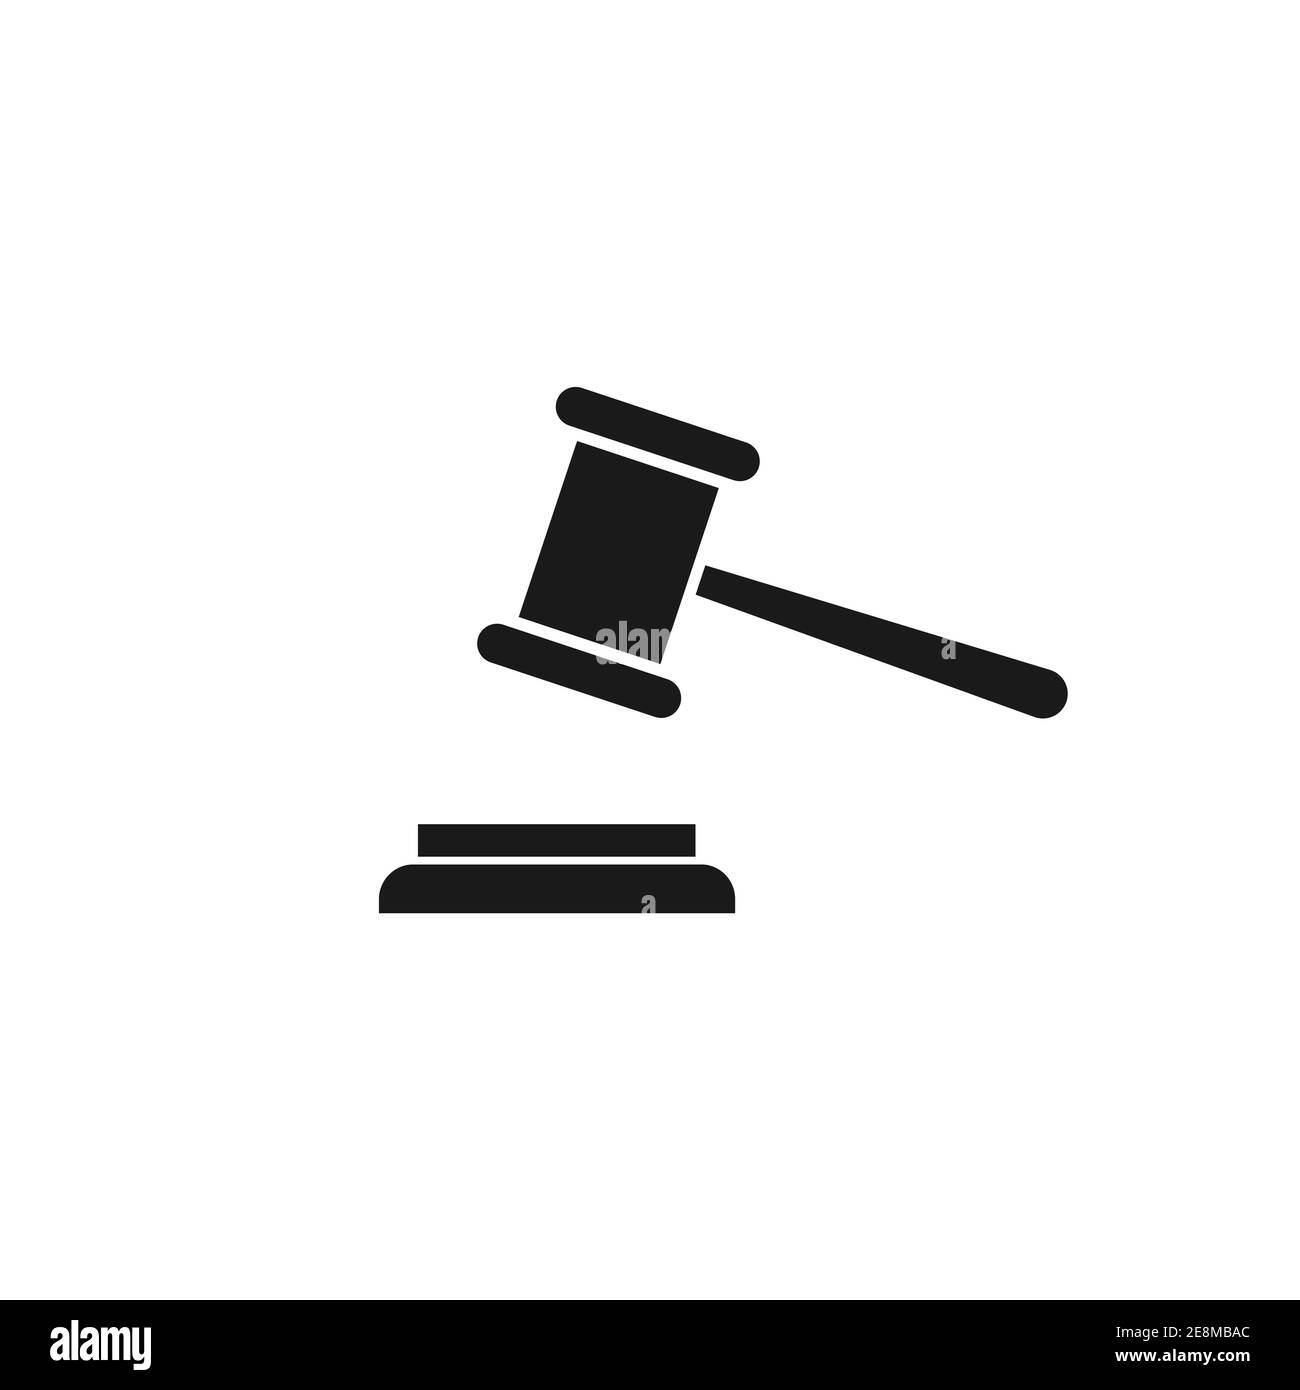 Hammer justice icon. Law symbol. Court gavel vector illustration. Judge gavel pictogram isolated on white. Stock Vector